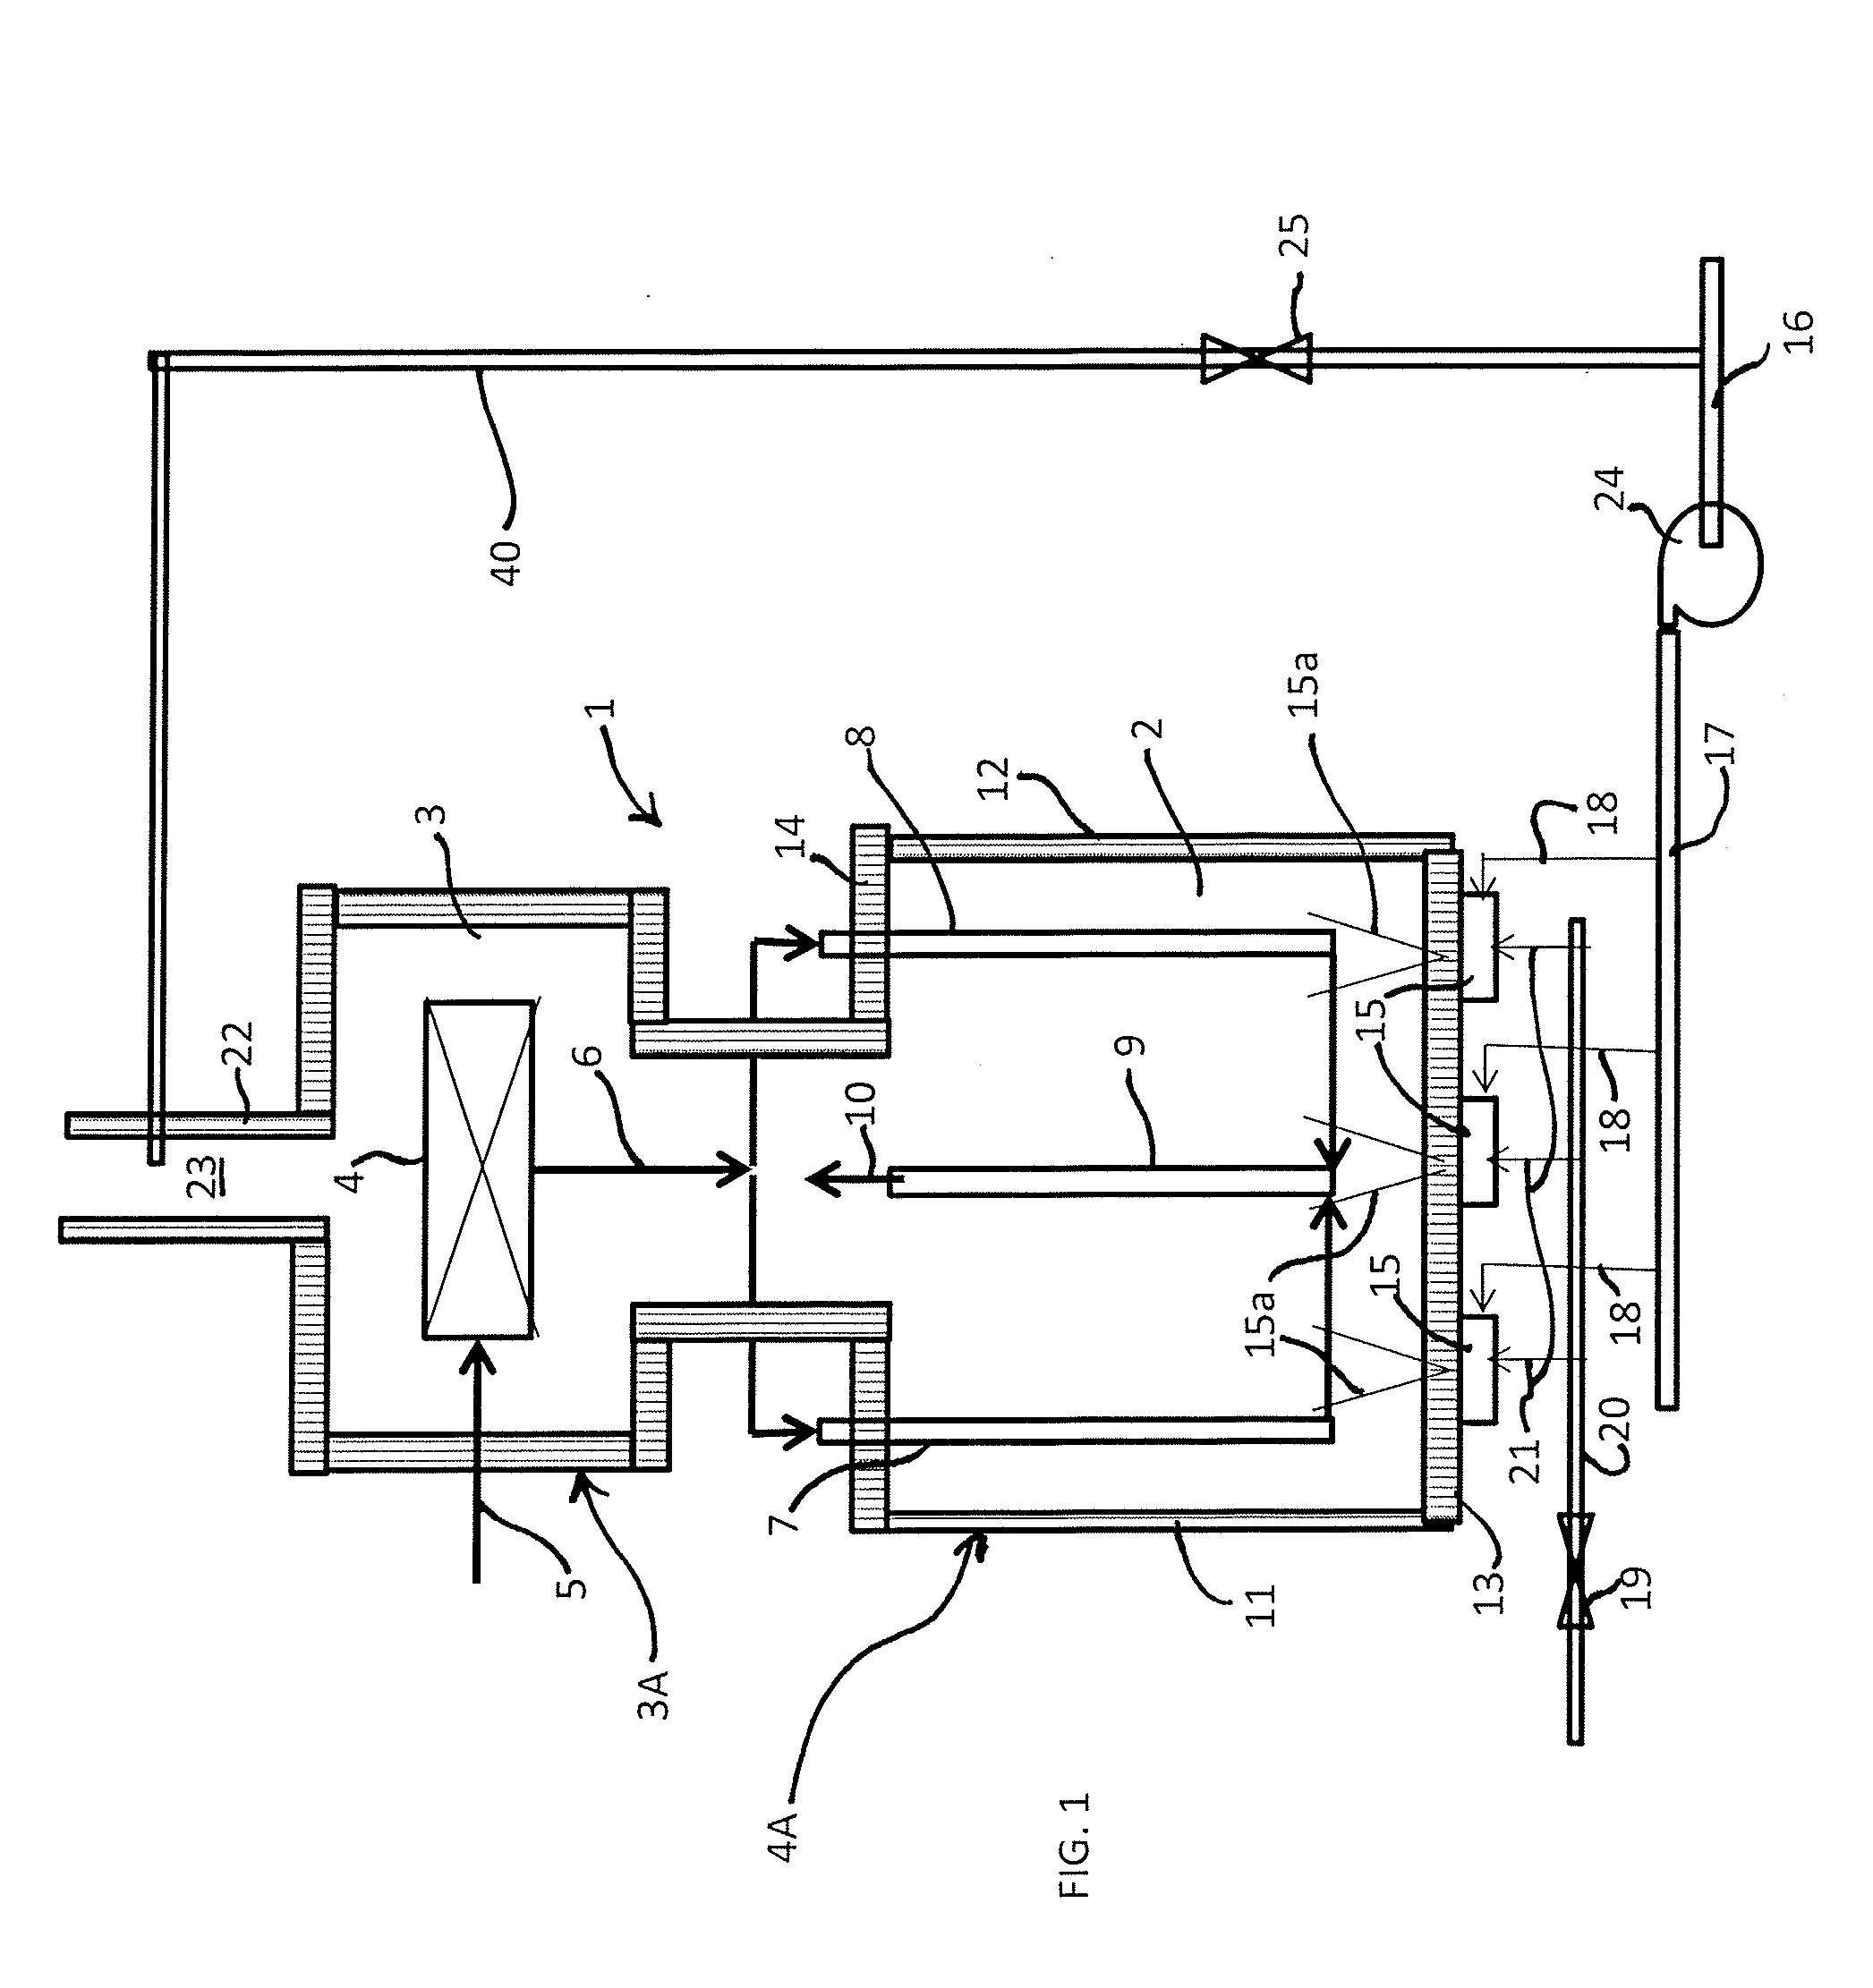 Furnaces and methods of reducing heat degrading of metal heating coils of furnaces